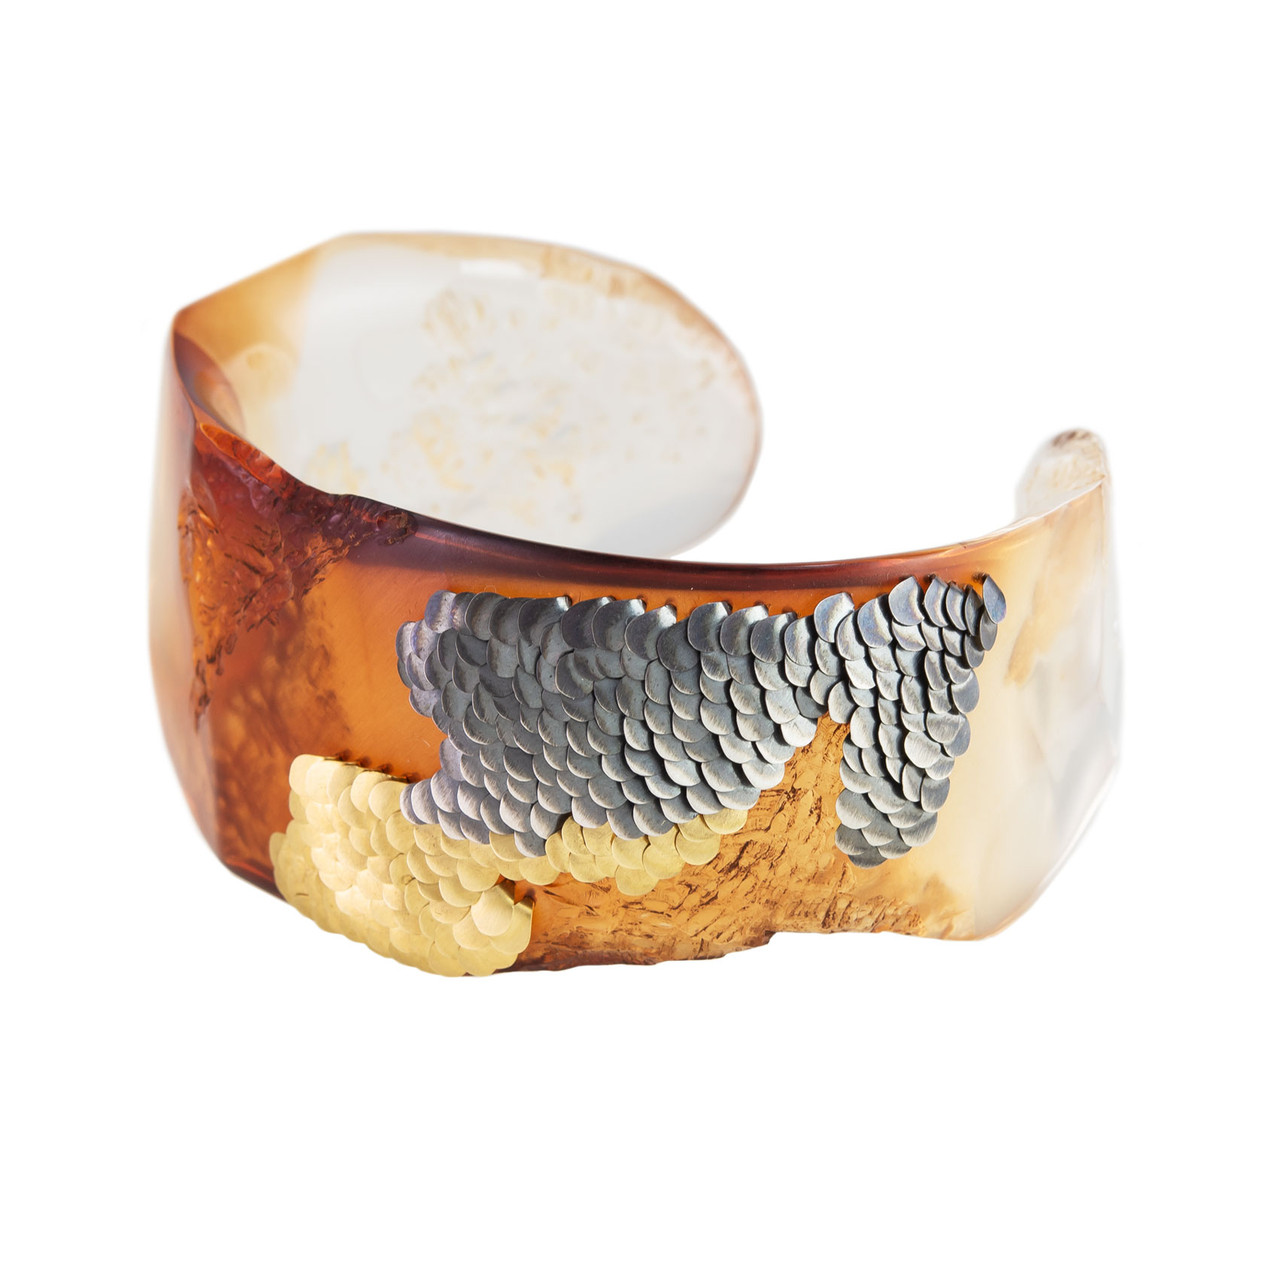 Emmeline Hastings, Murmur Acrylic Gold and Oxidised Silver Cuff, Tomfoolery